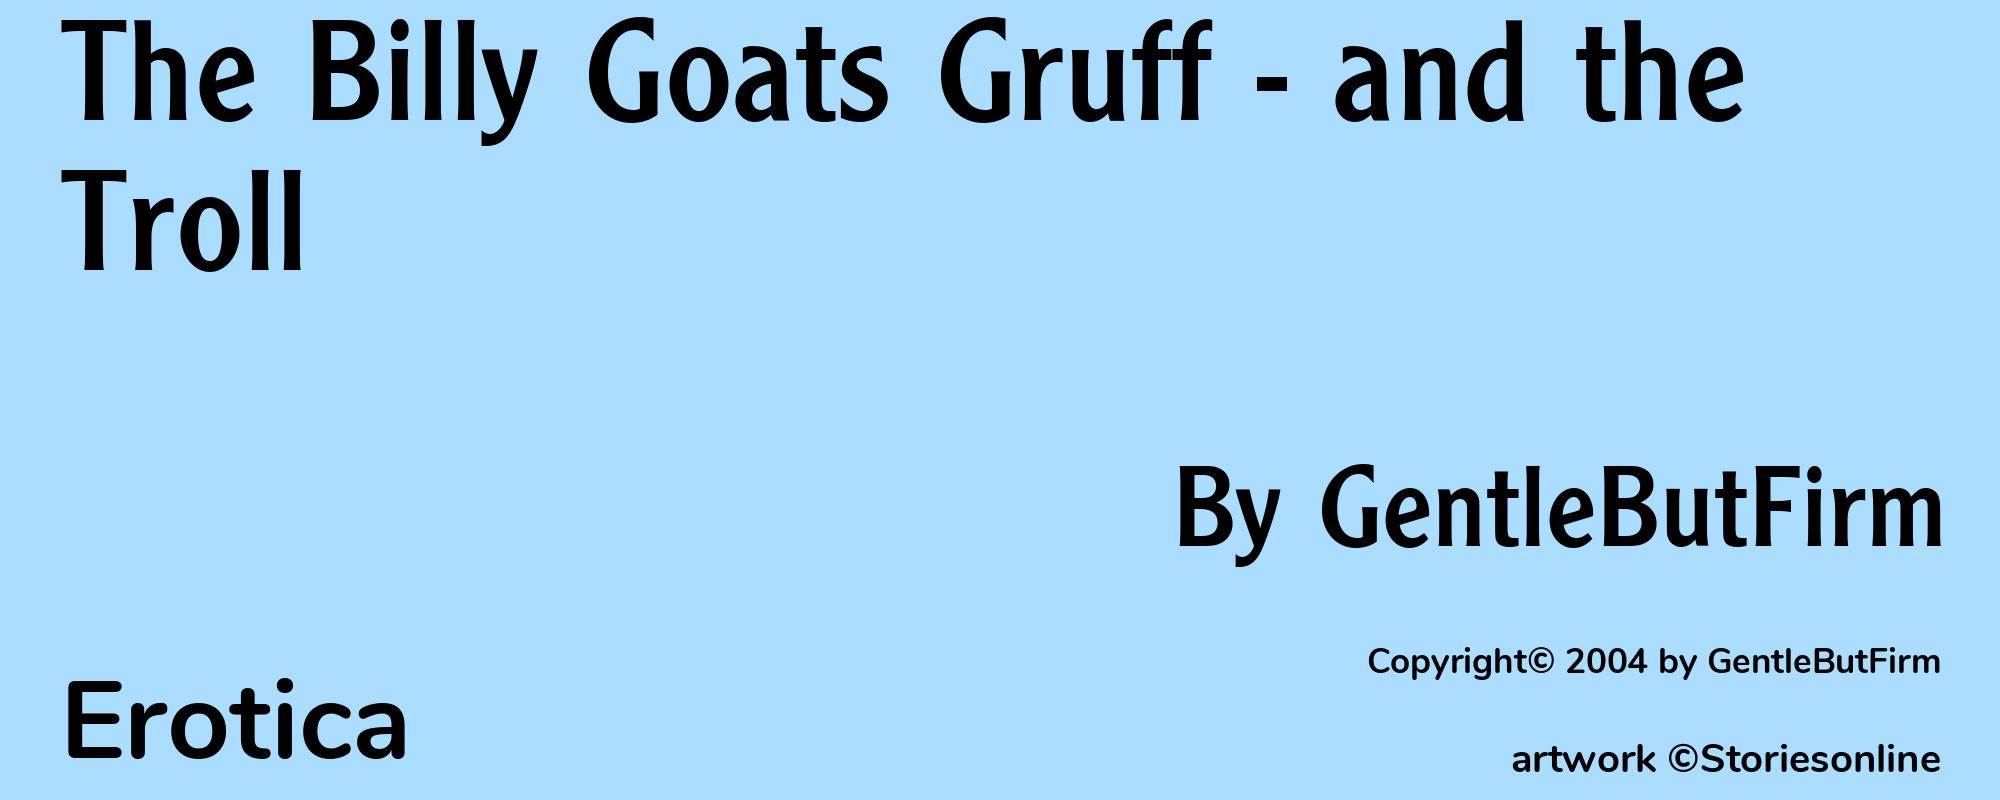 The Billy Goats Gruff - and the Troll - Cover